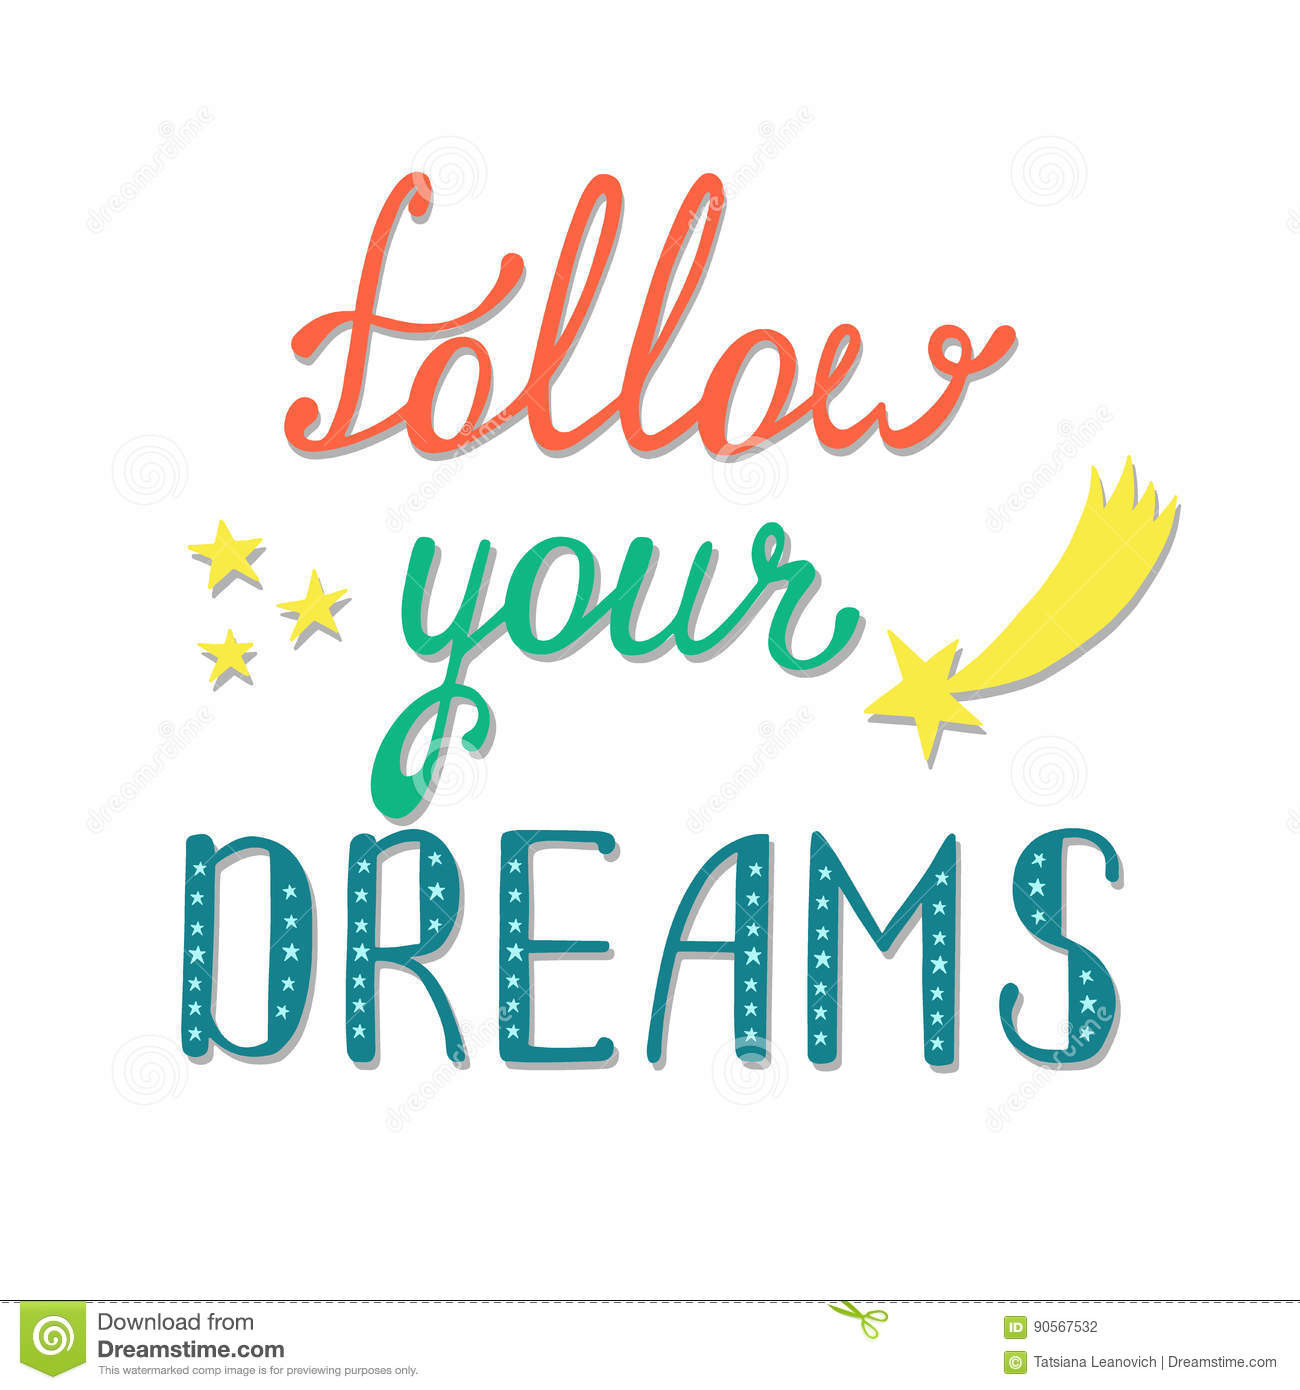 Child Dreams Quotes
 Follow Your Dreams Inspirational Quote About Happy Stock